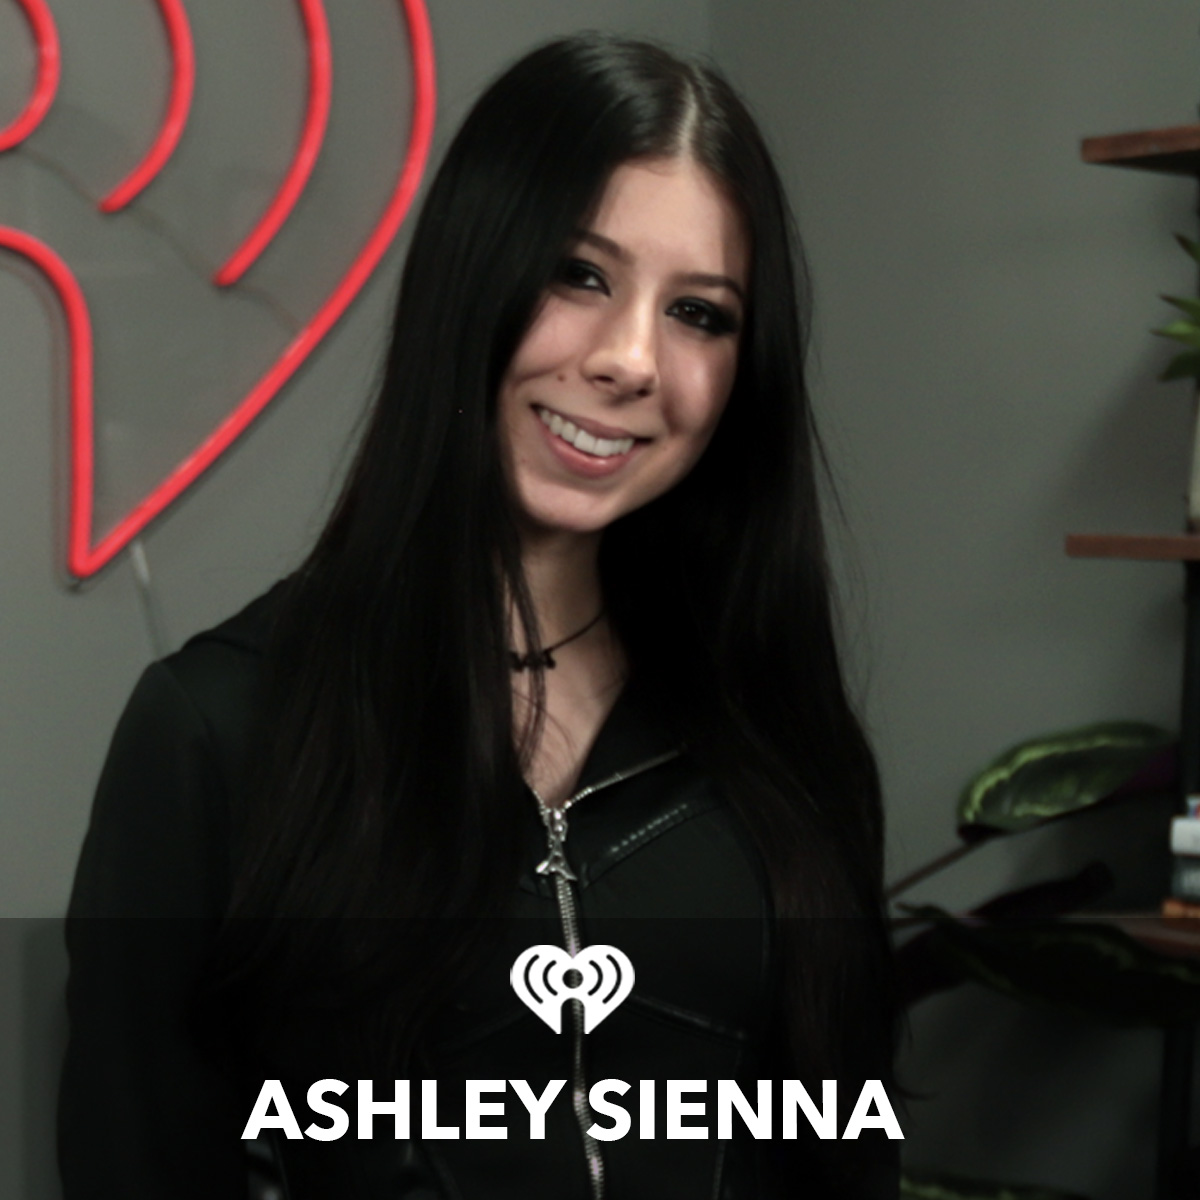 Ashley Sienna on 'What You Need", "Damn Those Eyes" Her Music Heroes, and Manifesting!